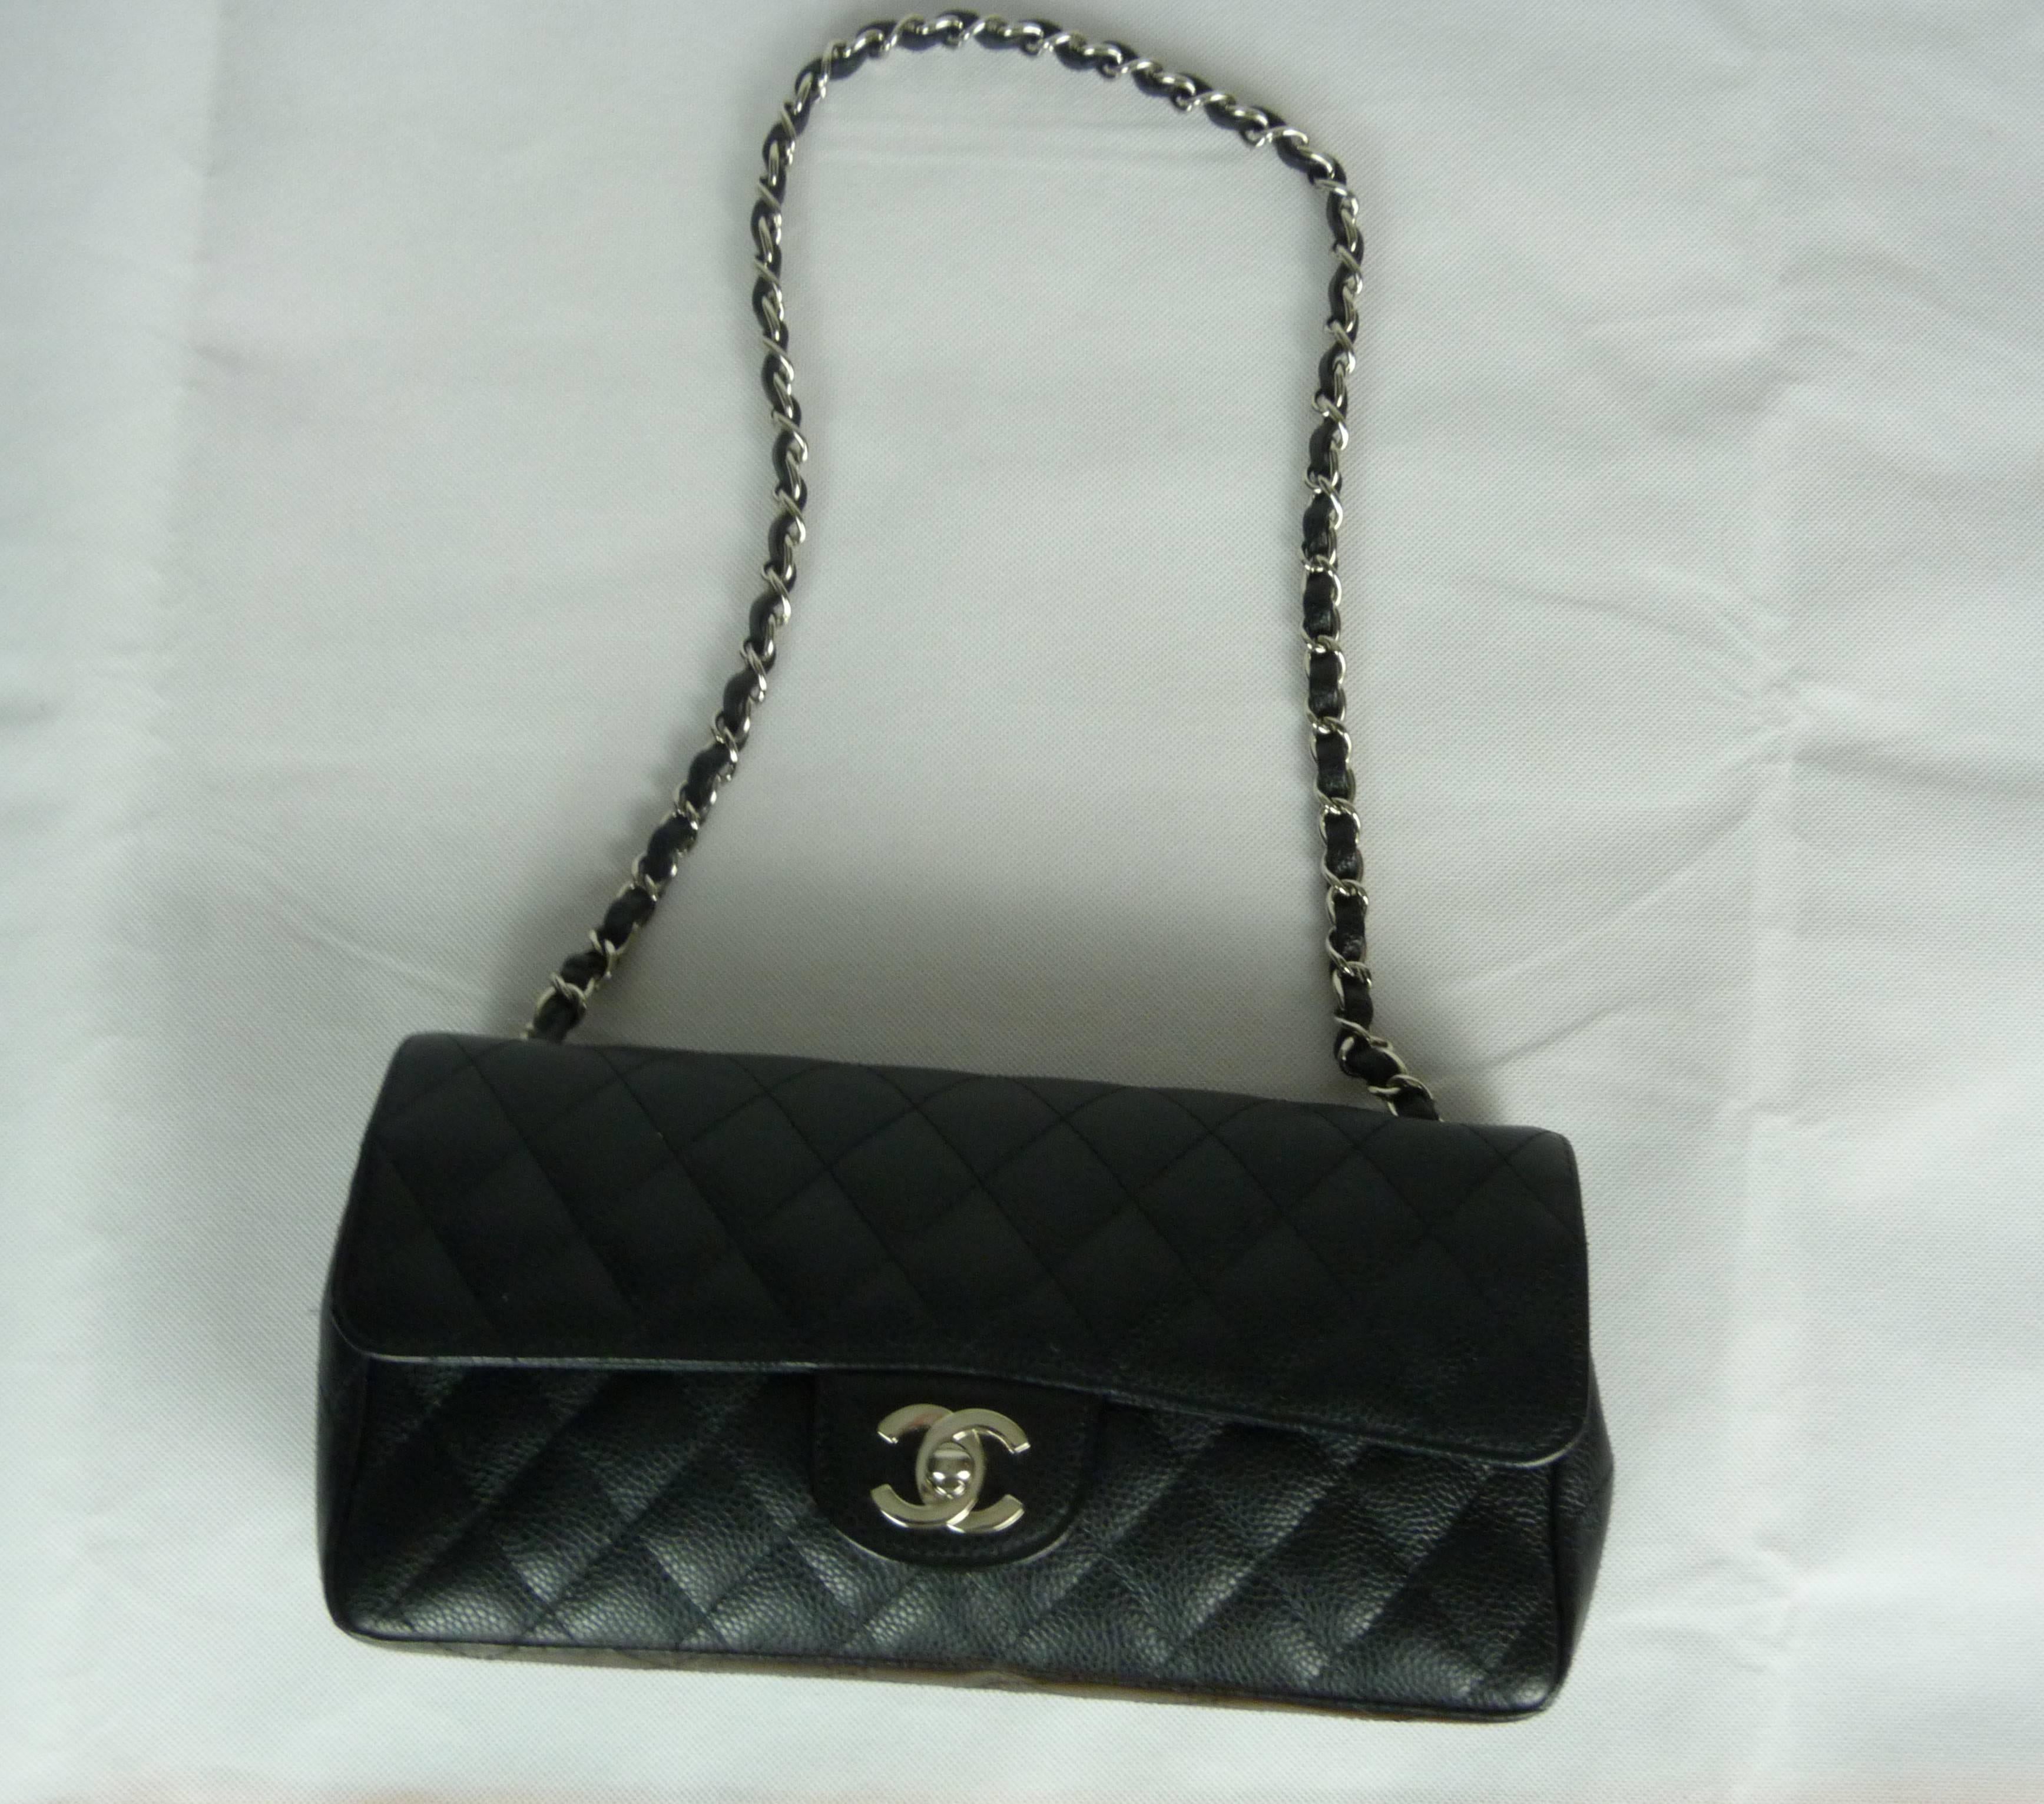 Bag in quilted black caviar leather, with the Chanel sign clasp chrome steel flap handle chain chrome steel entrelassé leather coordinated. Good condition.